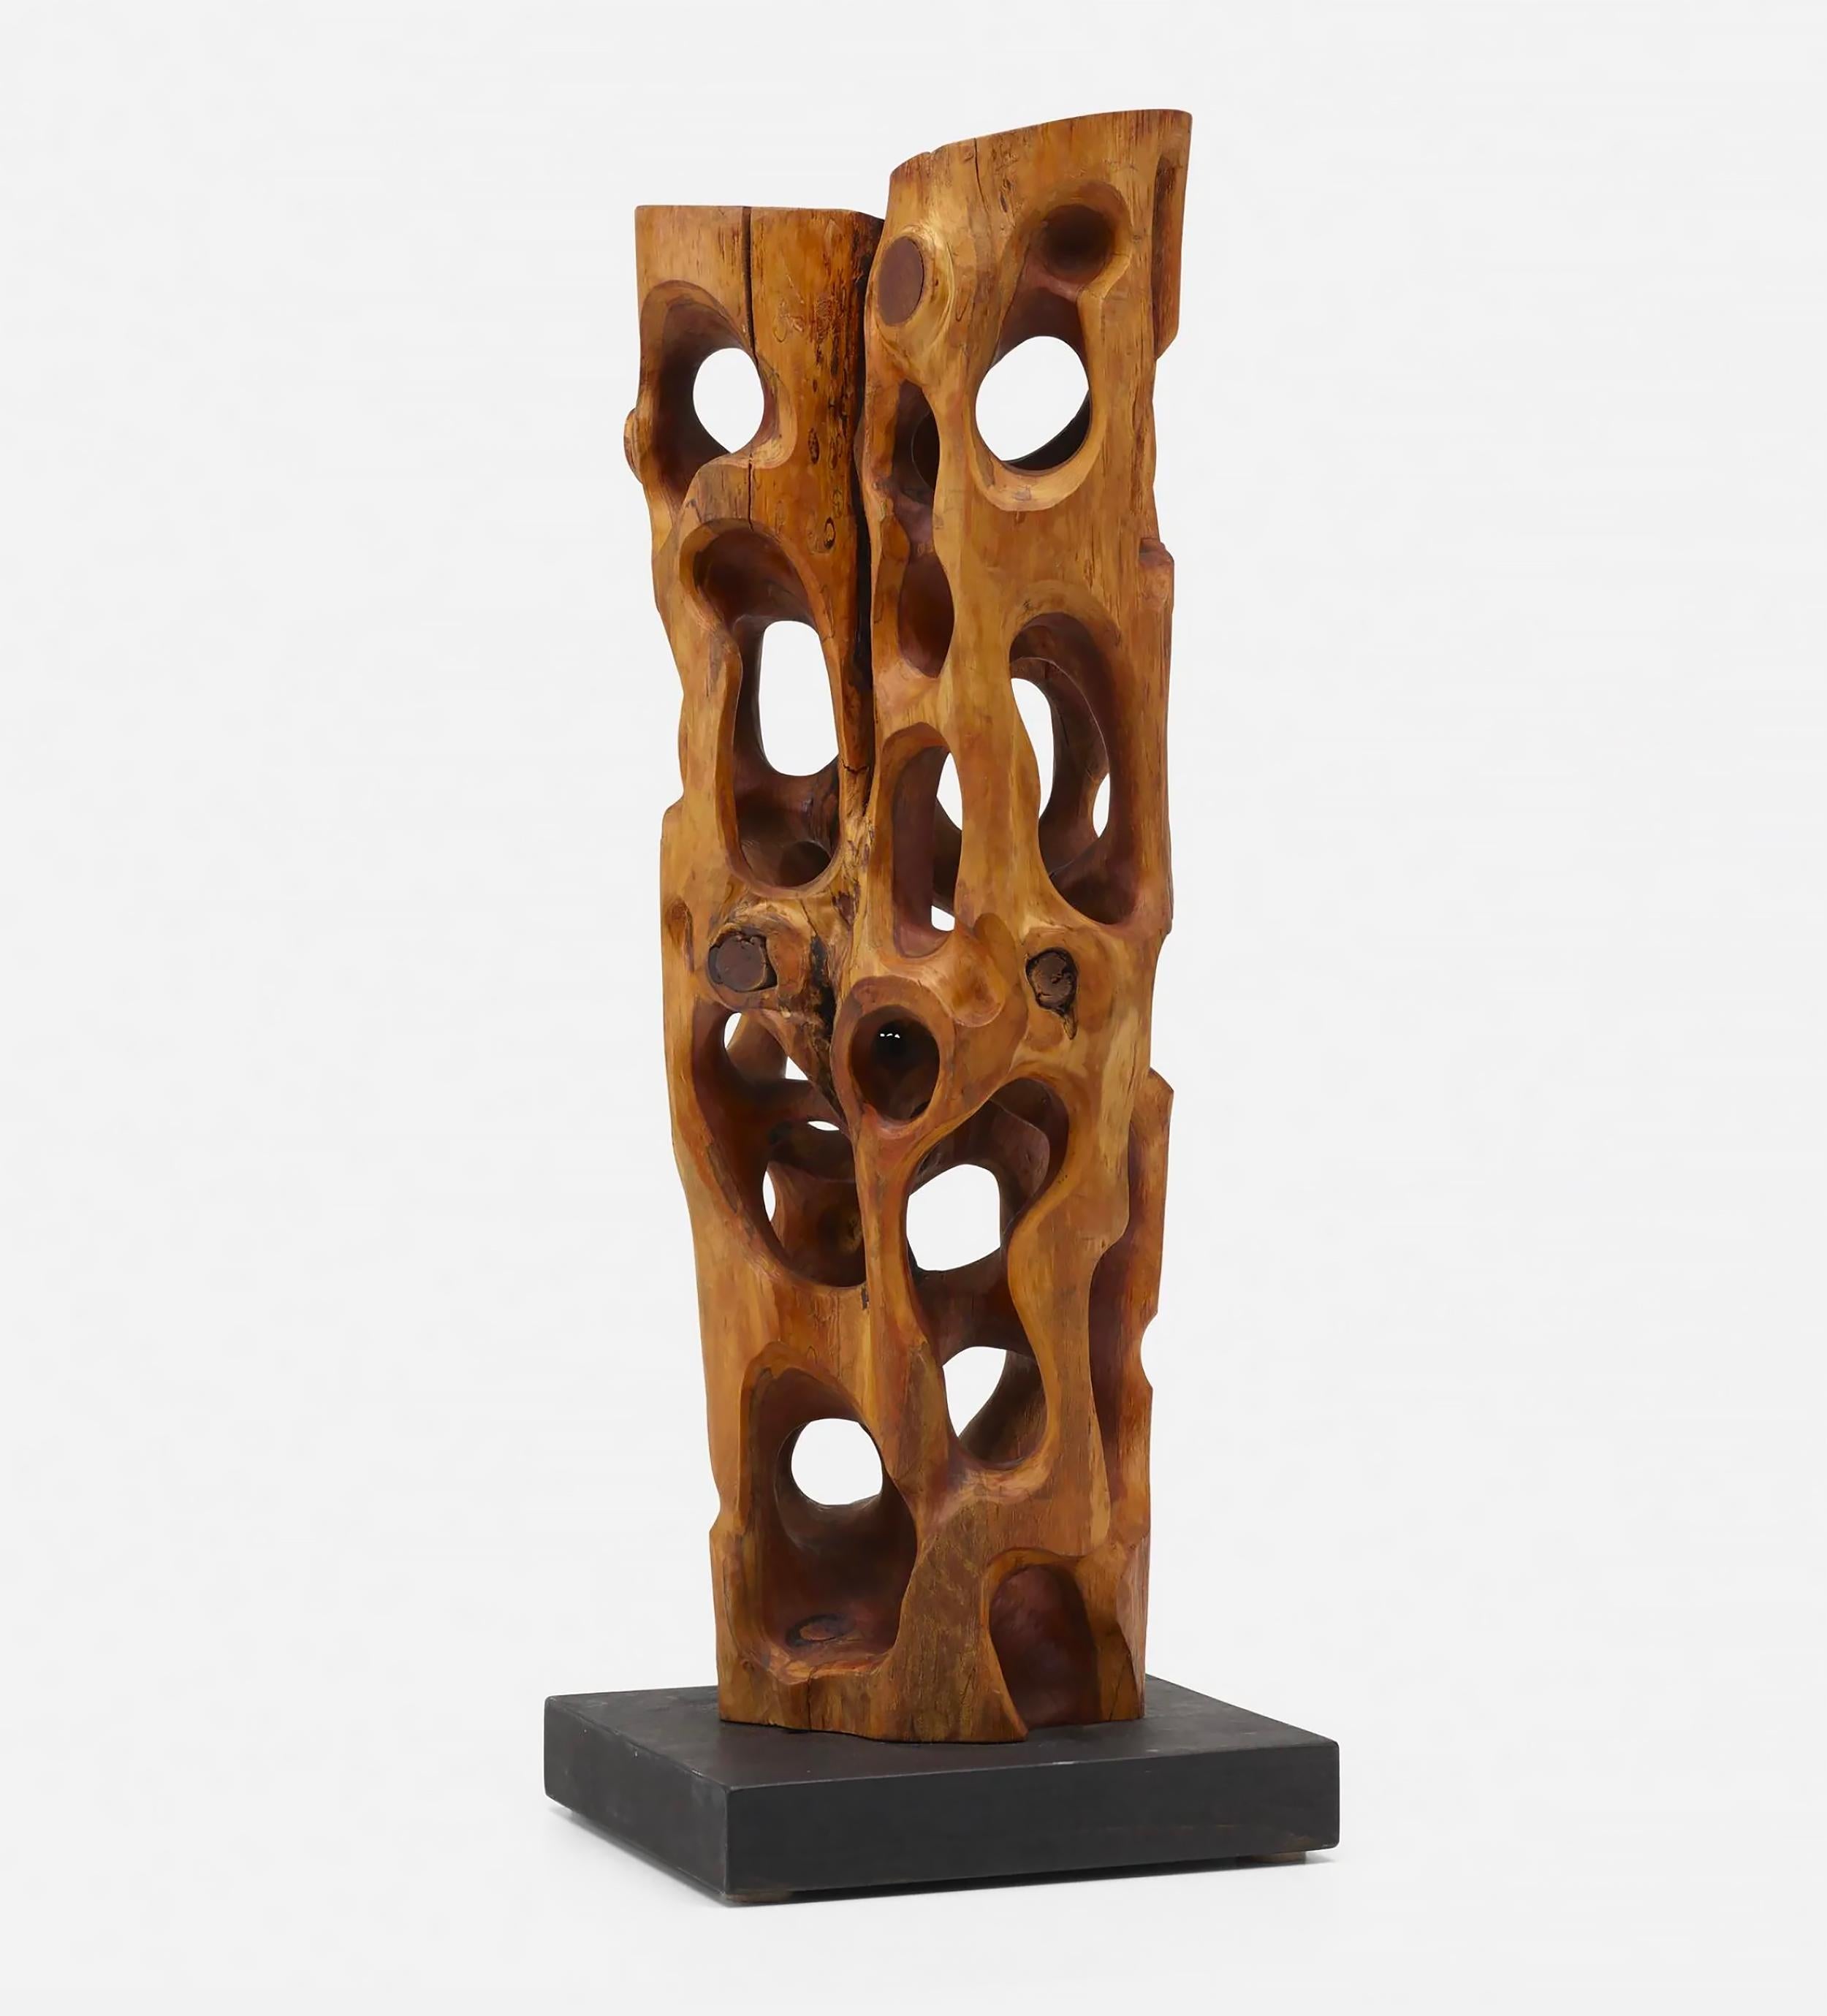 Mario Dal Fabbro Abstract Sculpture - Untitled Carved Wood Sculpture - Driftwood